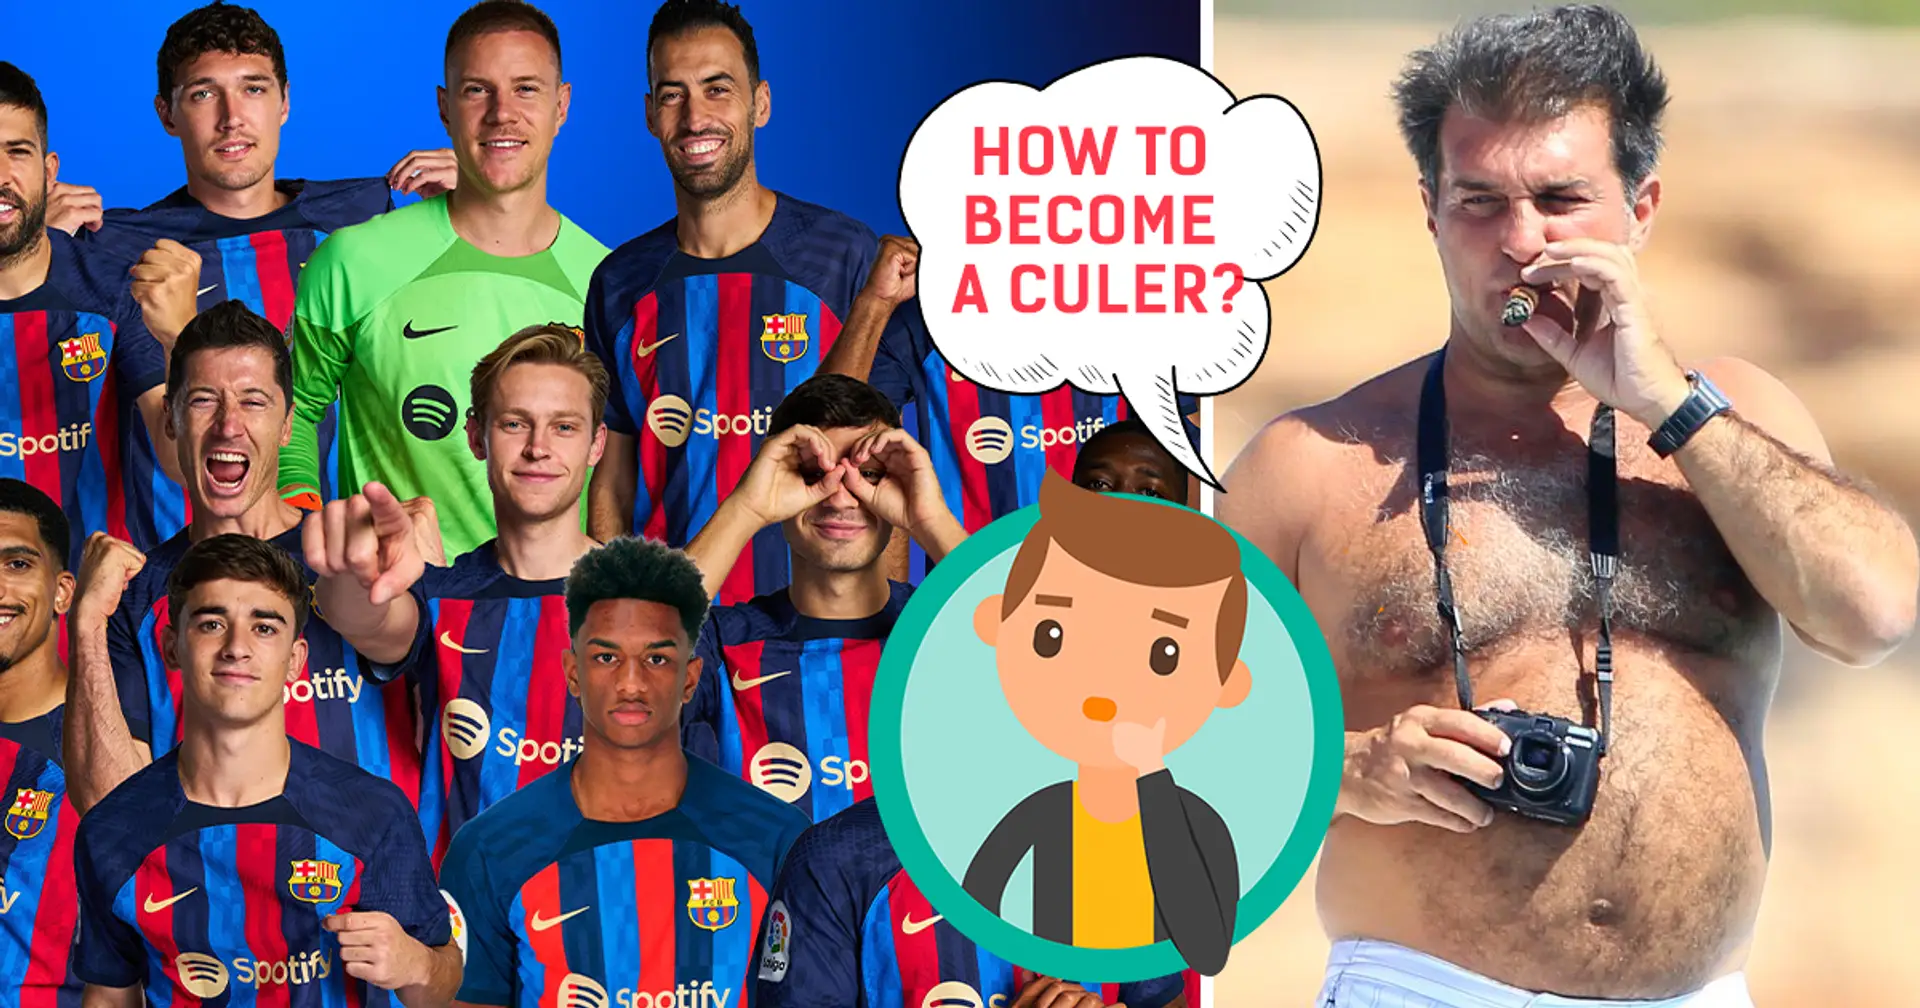 'How can I reach my dream of joining Barca'? A basic guide to fans' frequent questions